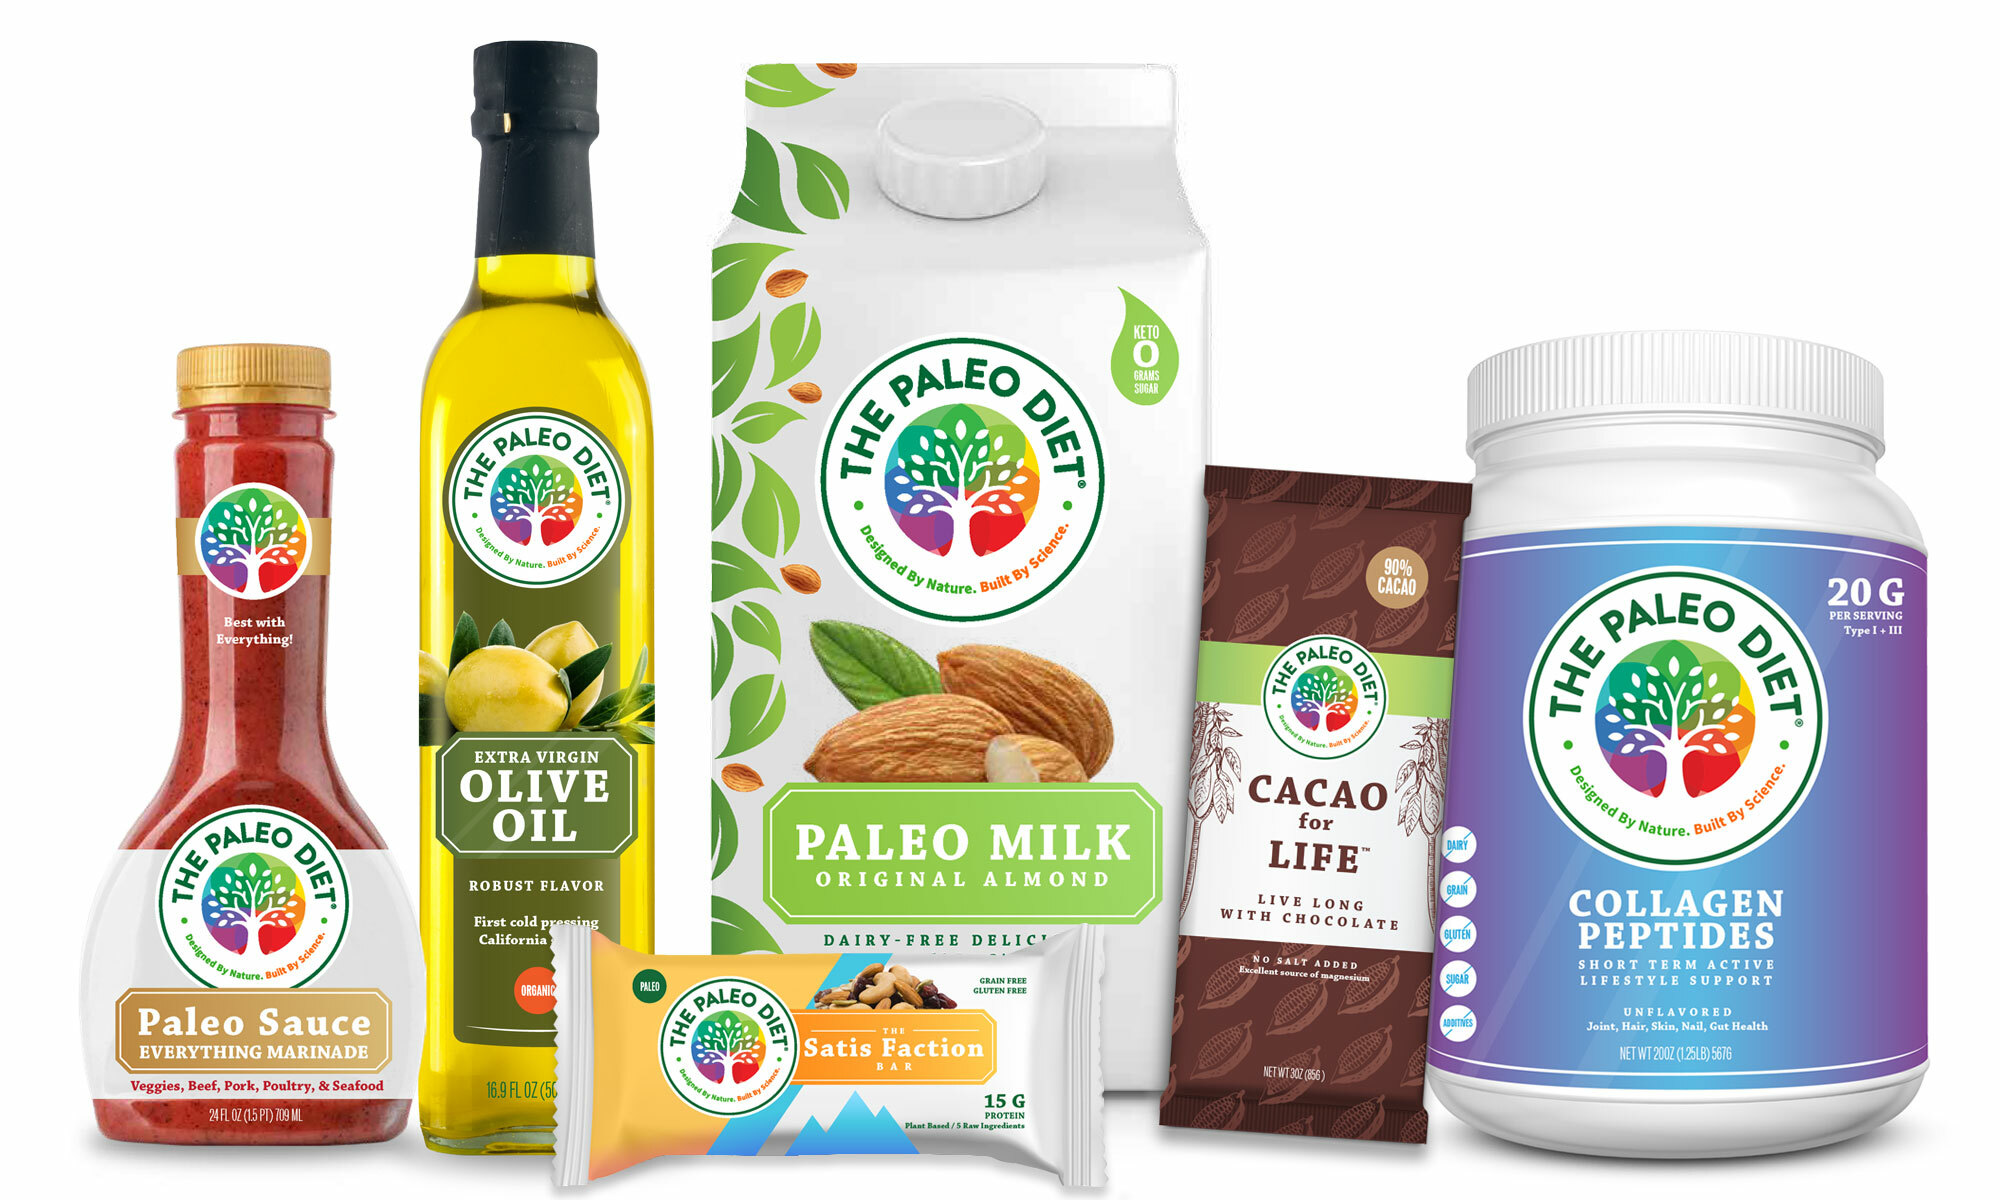 A group of product mockup concepts full-branded by The Paleo Diet